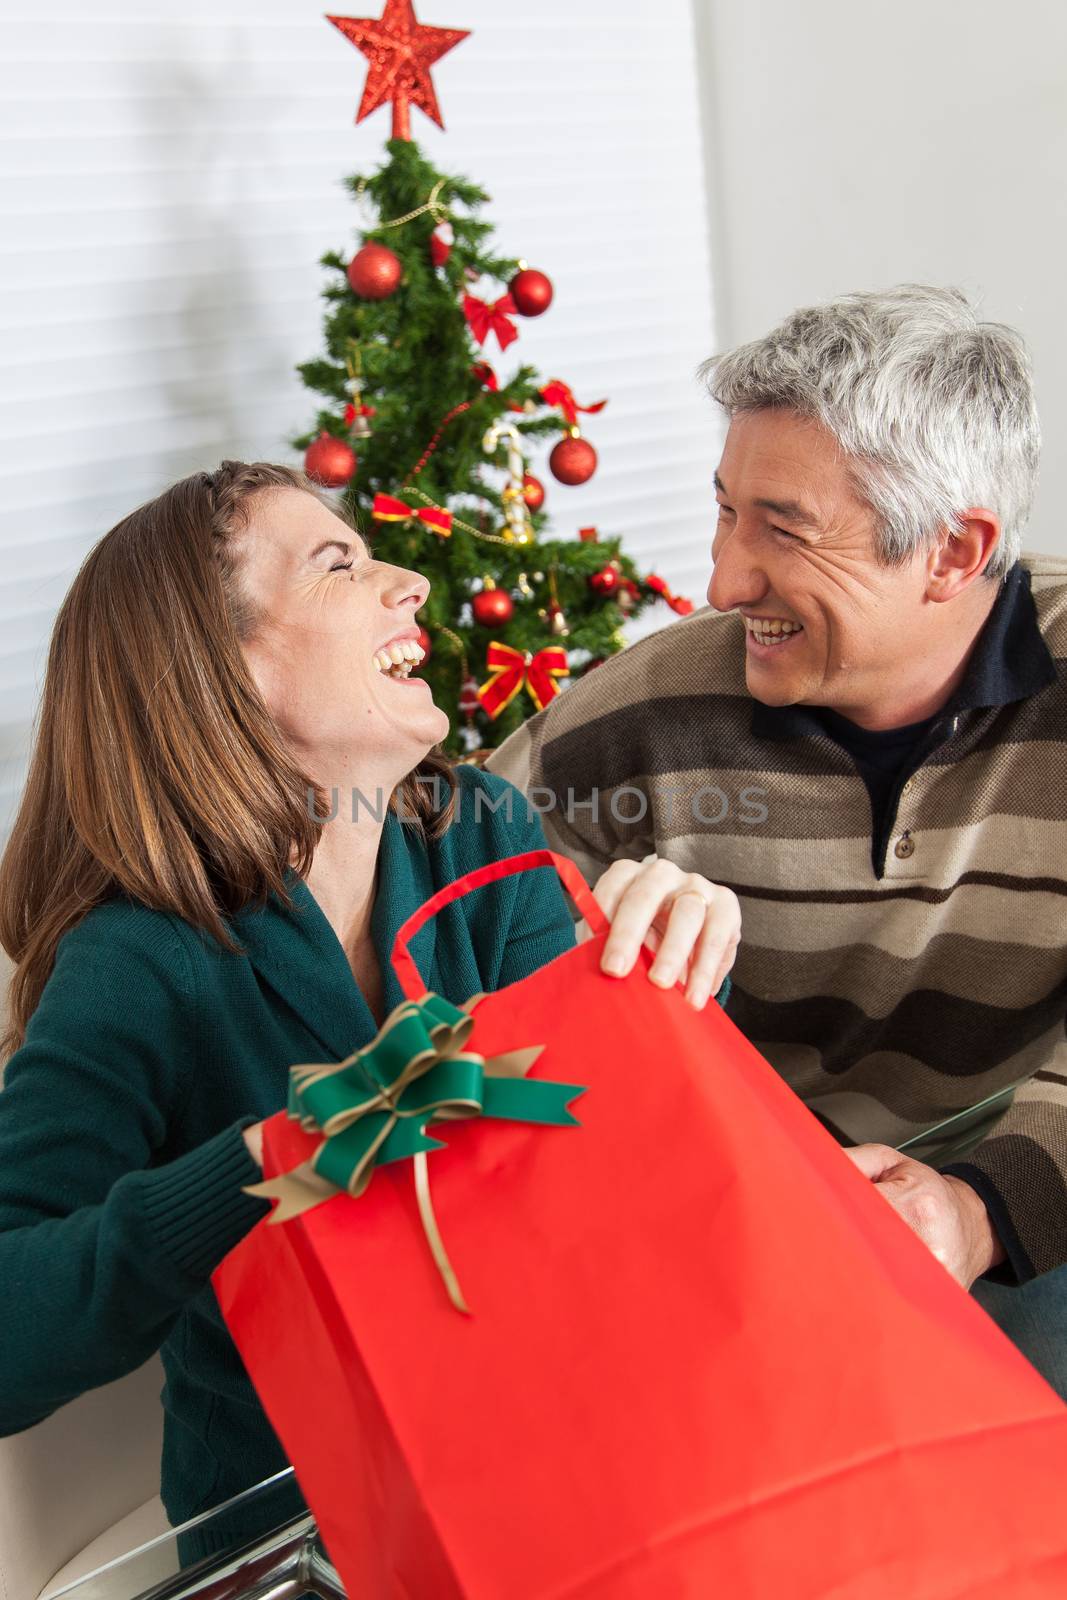 35-40, bag, beautiful, caucasian, celebrating, celebration, cheerful, christmas, cute, female, festive, festivity, gift, giving, green, hand, happy, holding, joyful, laughing, love, male, man, merry, model, old, open, opening, person, present, pretty, property, red, release, smile, smiling, two, vertical, warm, white, years